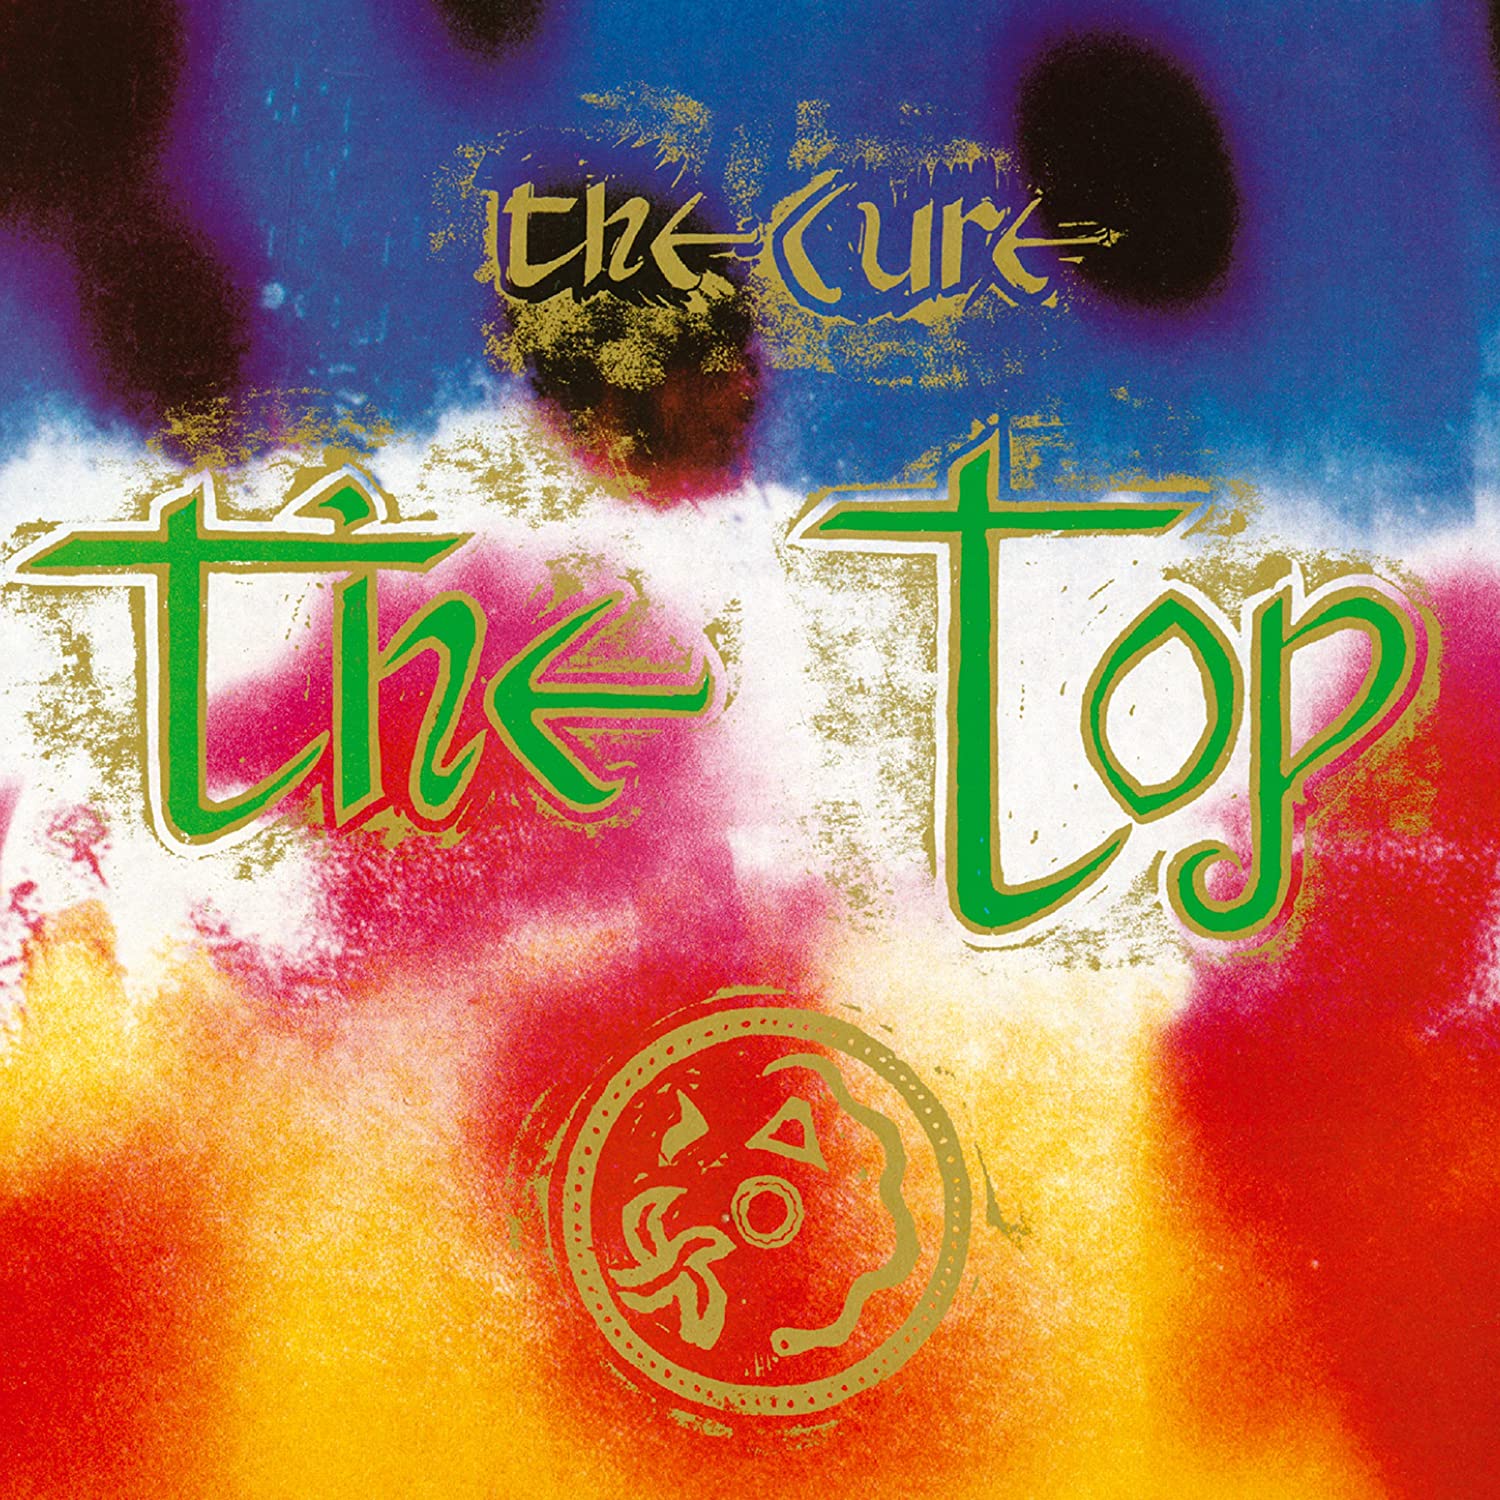 The Cure "Top" LP